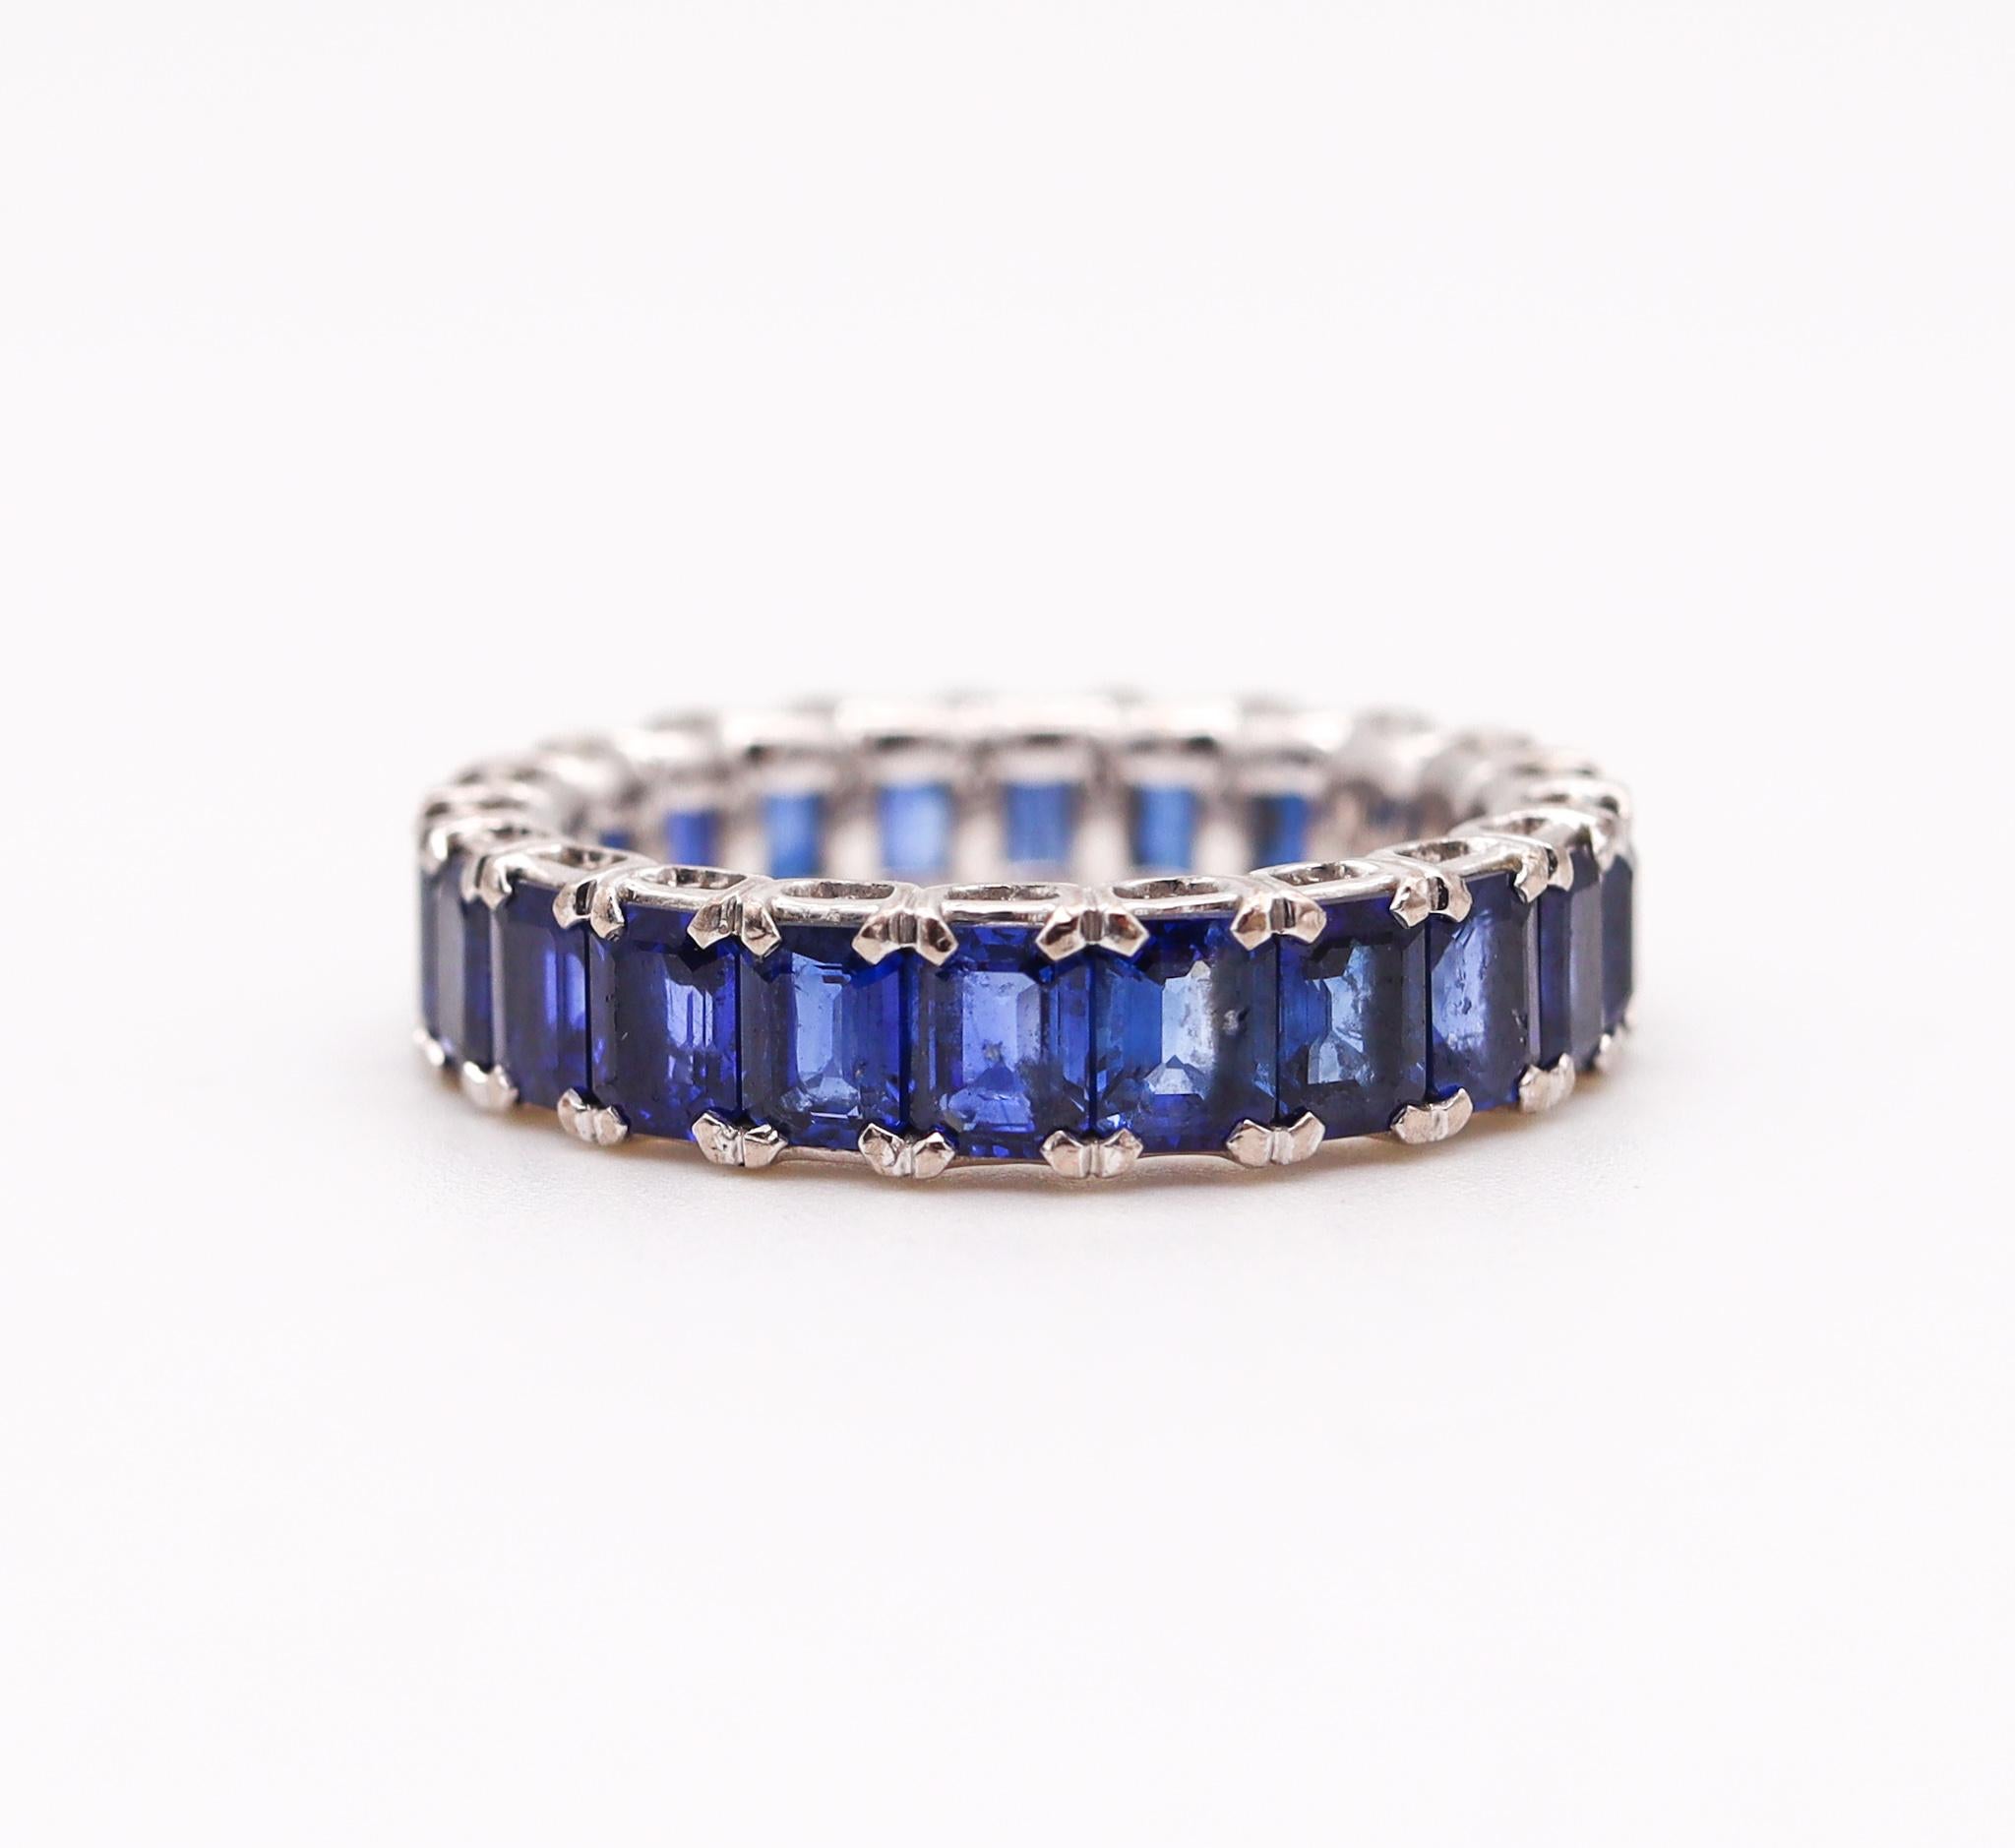 Emerald Cut Eternity Band Ring in 18Kt White Gold with 5.58 Cts in Vivid Blue Sapphires For Sale